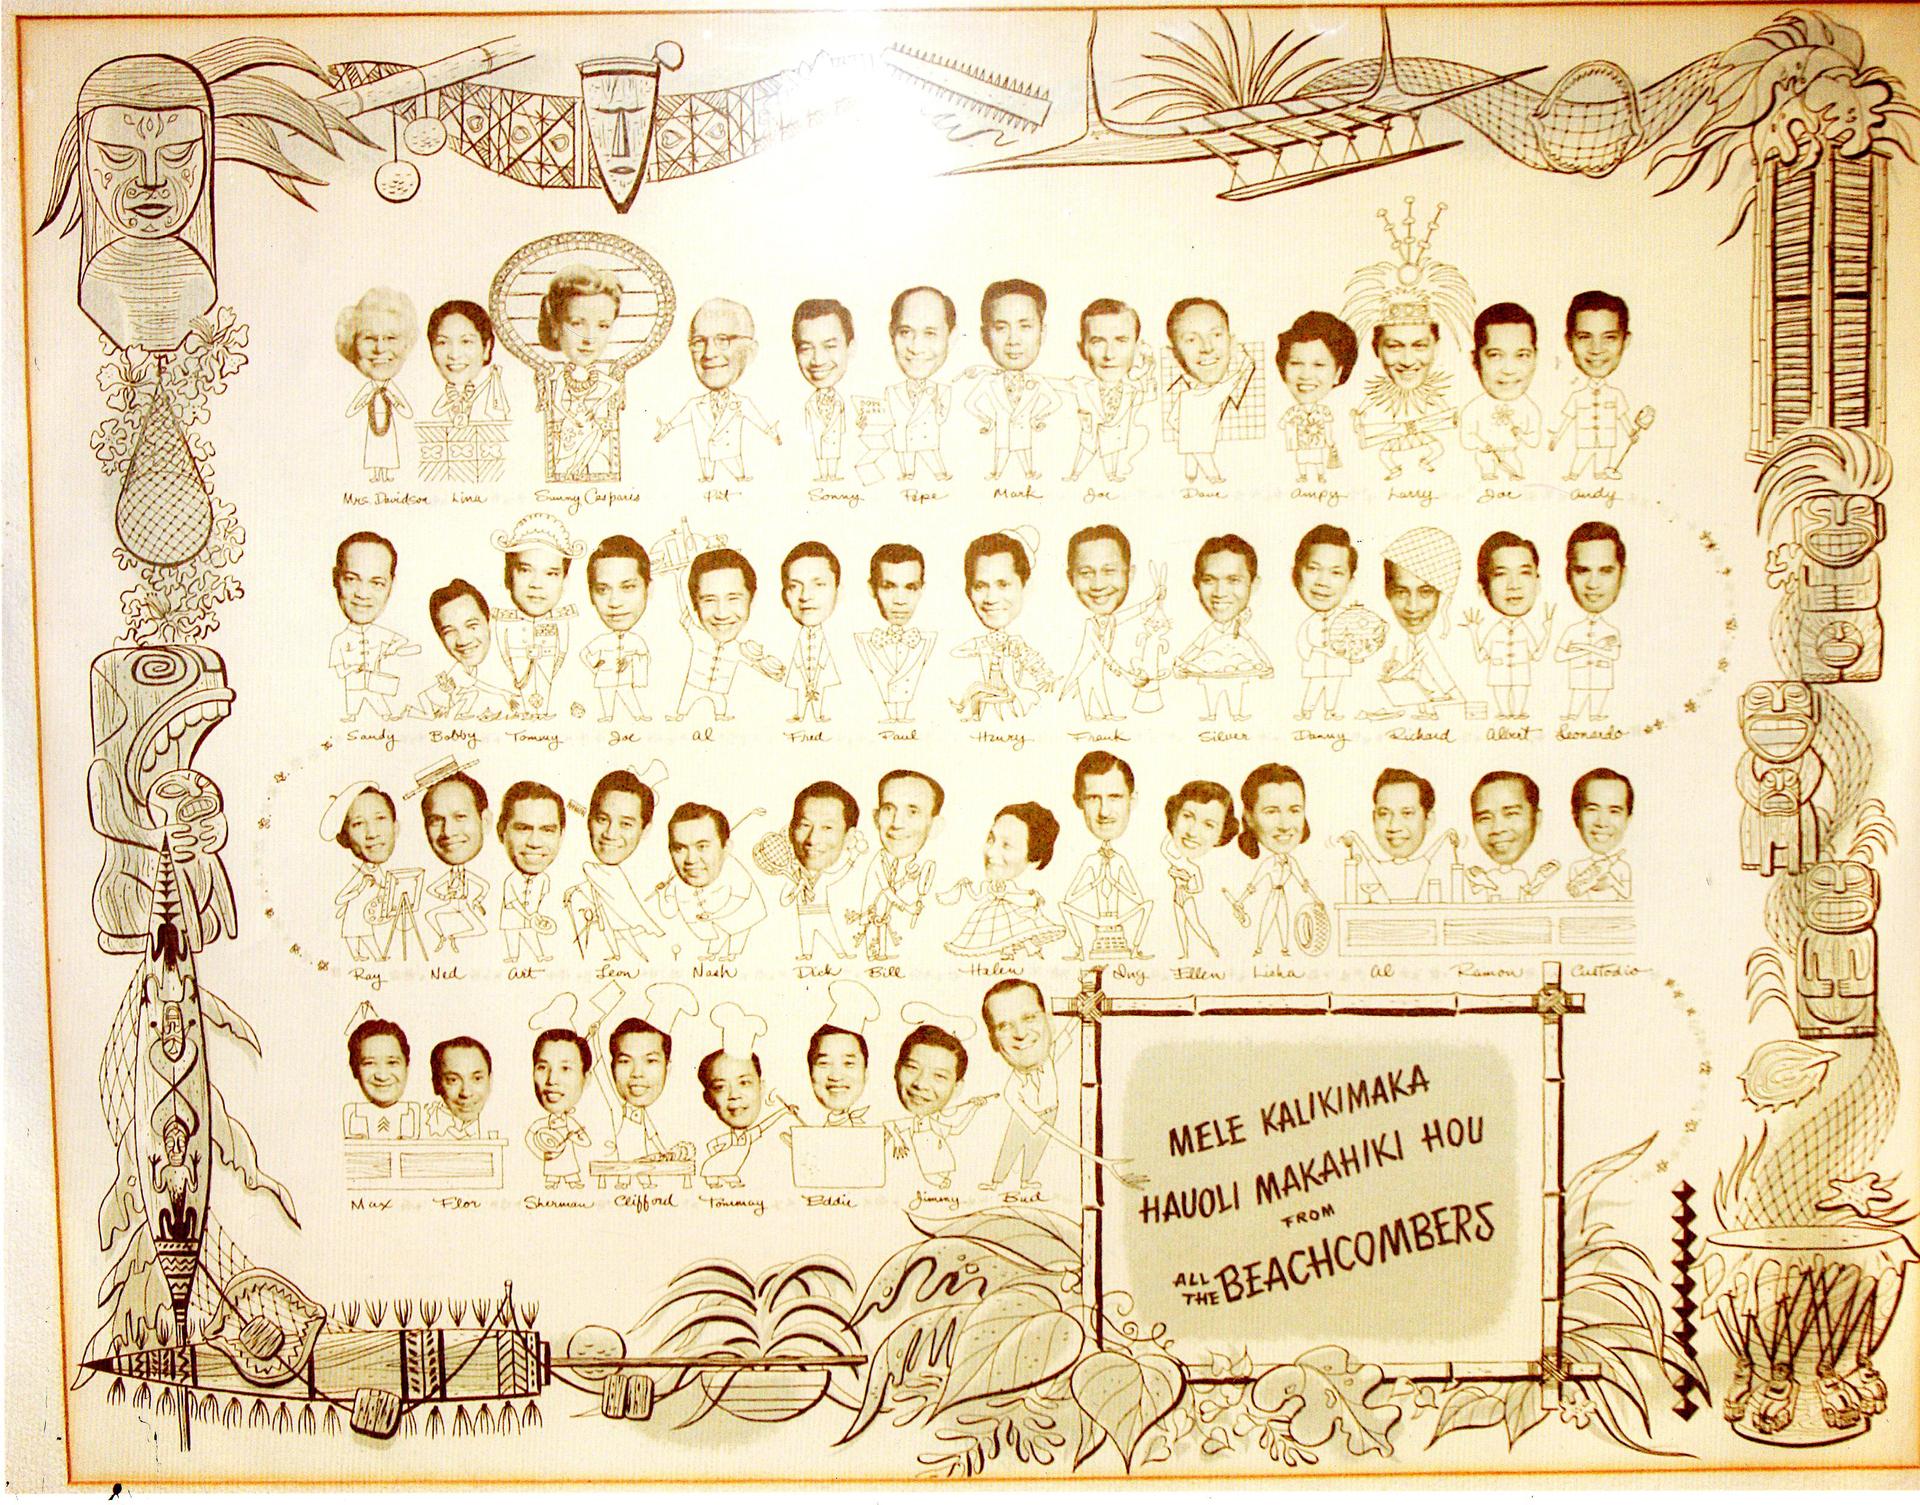 Vintage poster of faces, line drawing, with names below